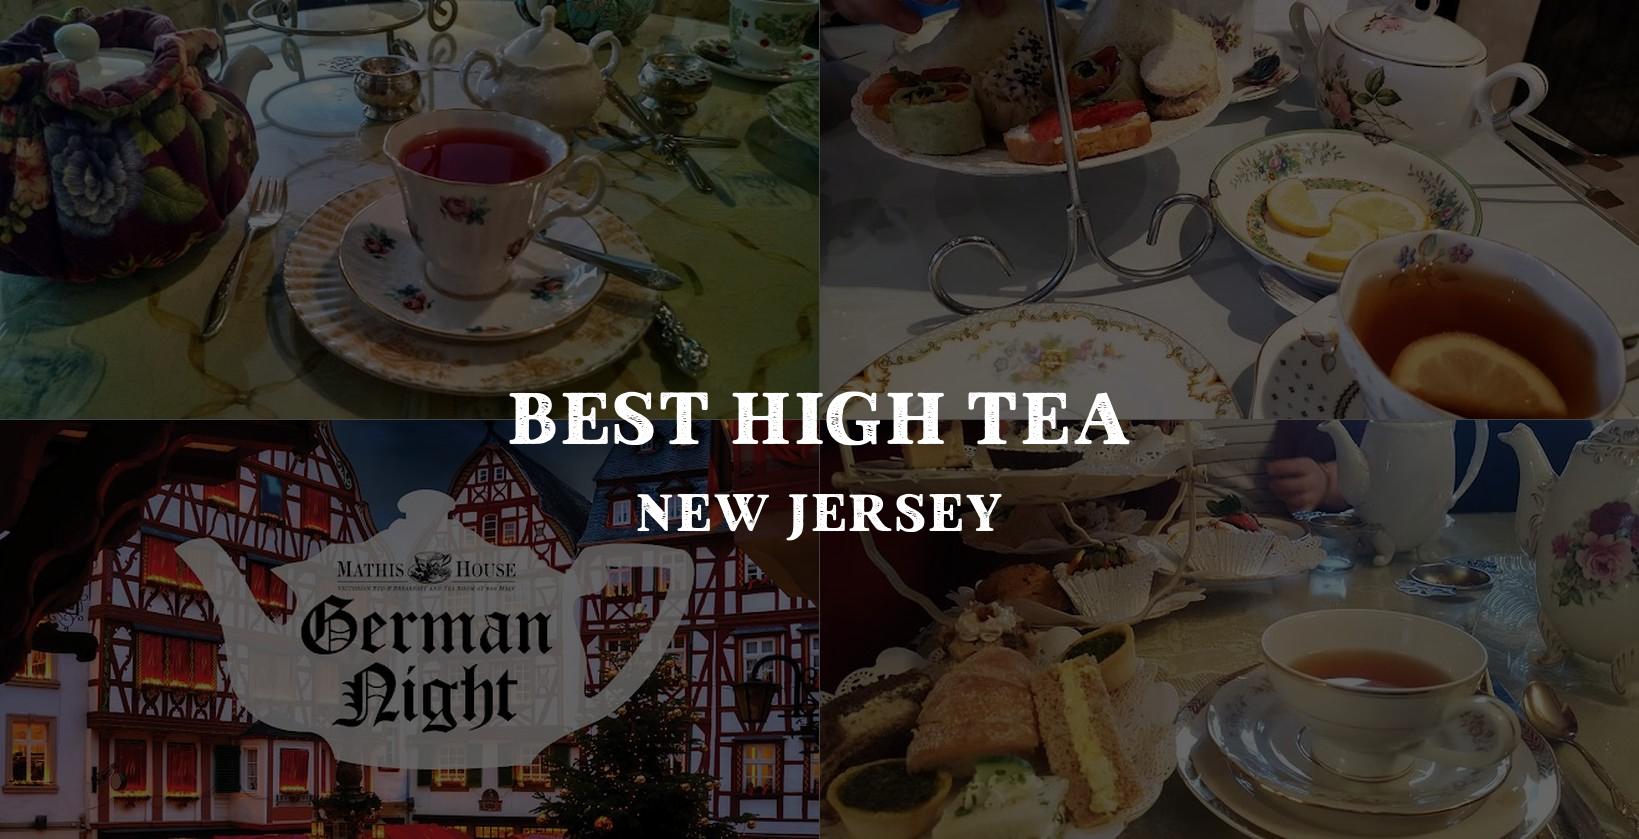 Choosing the perfect high tea in New Jersey